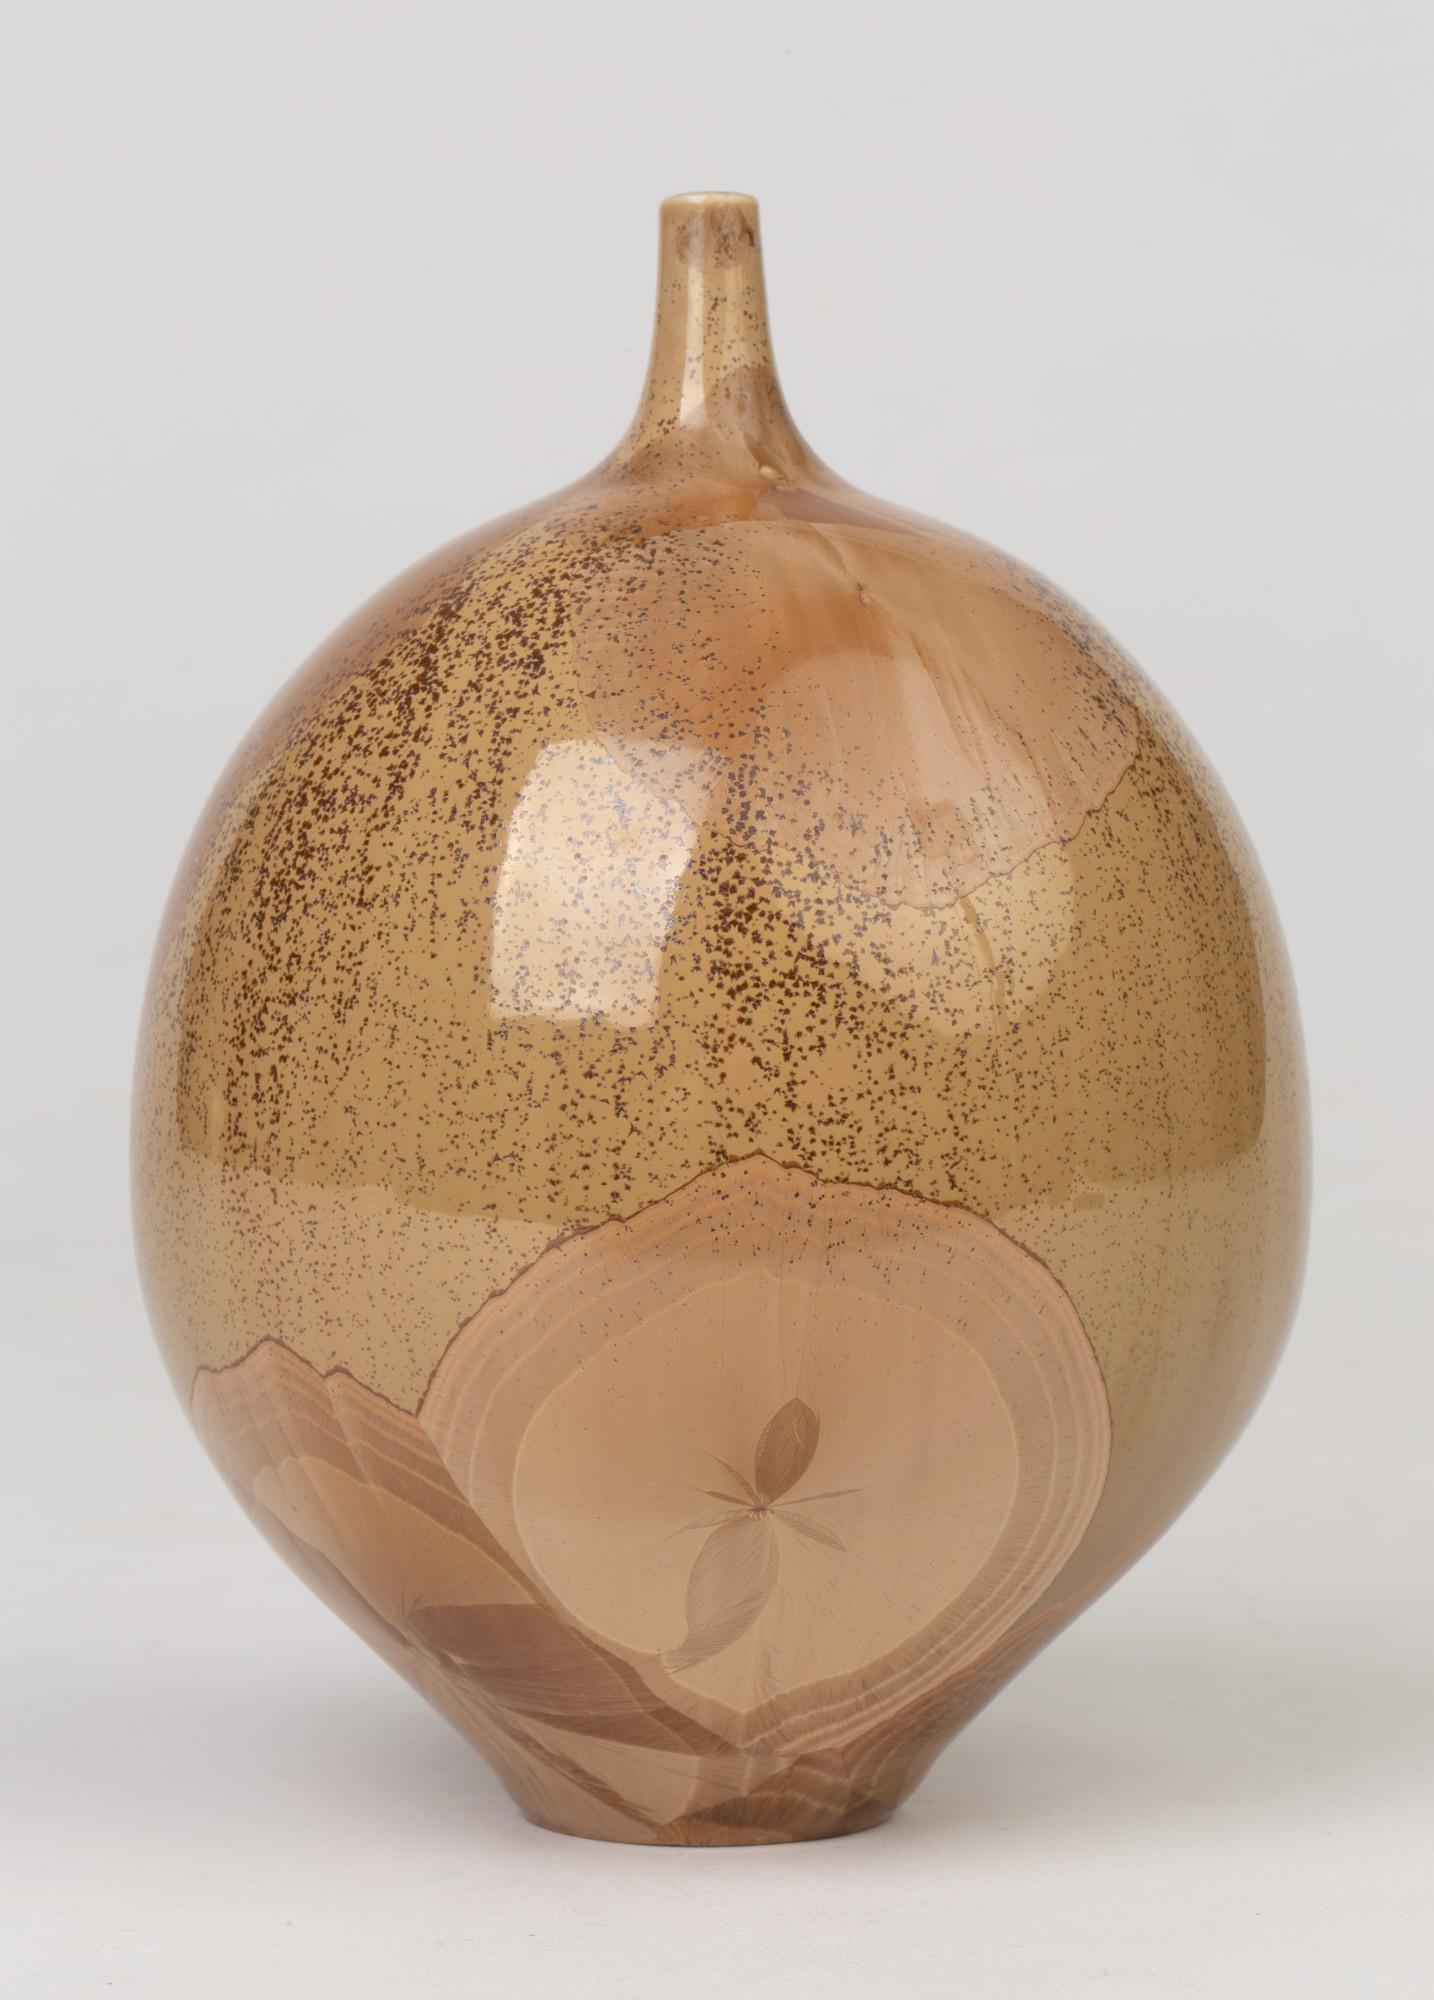 A stunning Studio Pottery bottle vase decorated in crystalline glazes by Derek Clarkson (1928-2013) dated 2000. The porcelain bodied vase stands on a narrow rounded foot with a rounded bulbous body and with a short narrow neck. The body of the vase